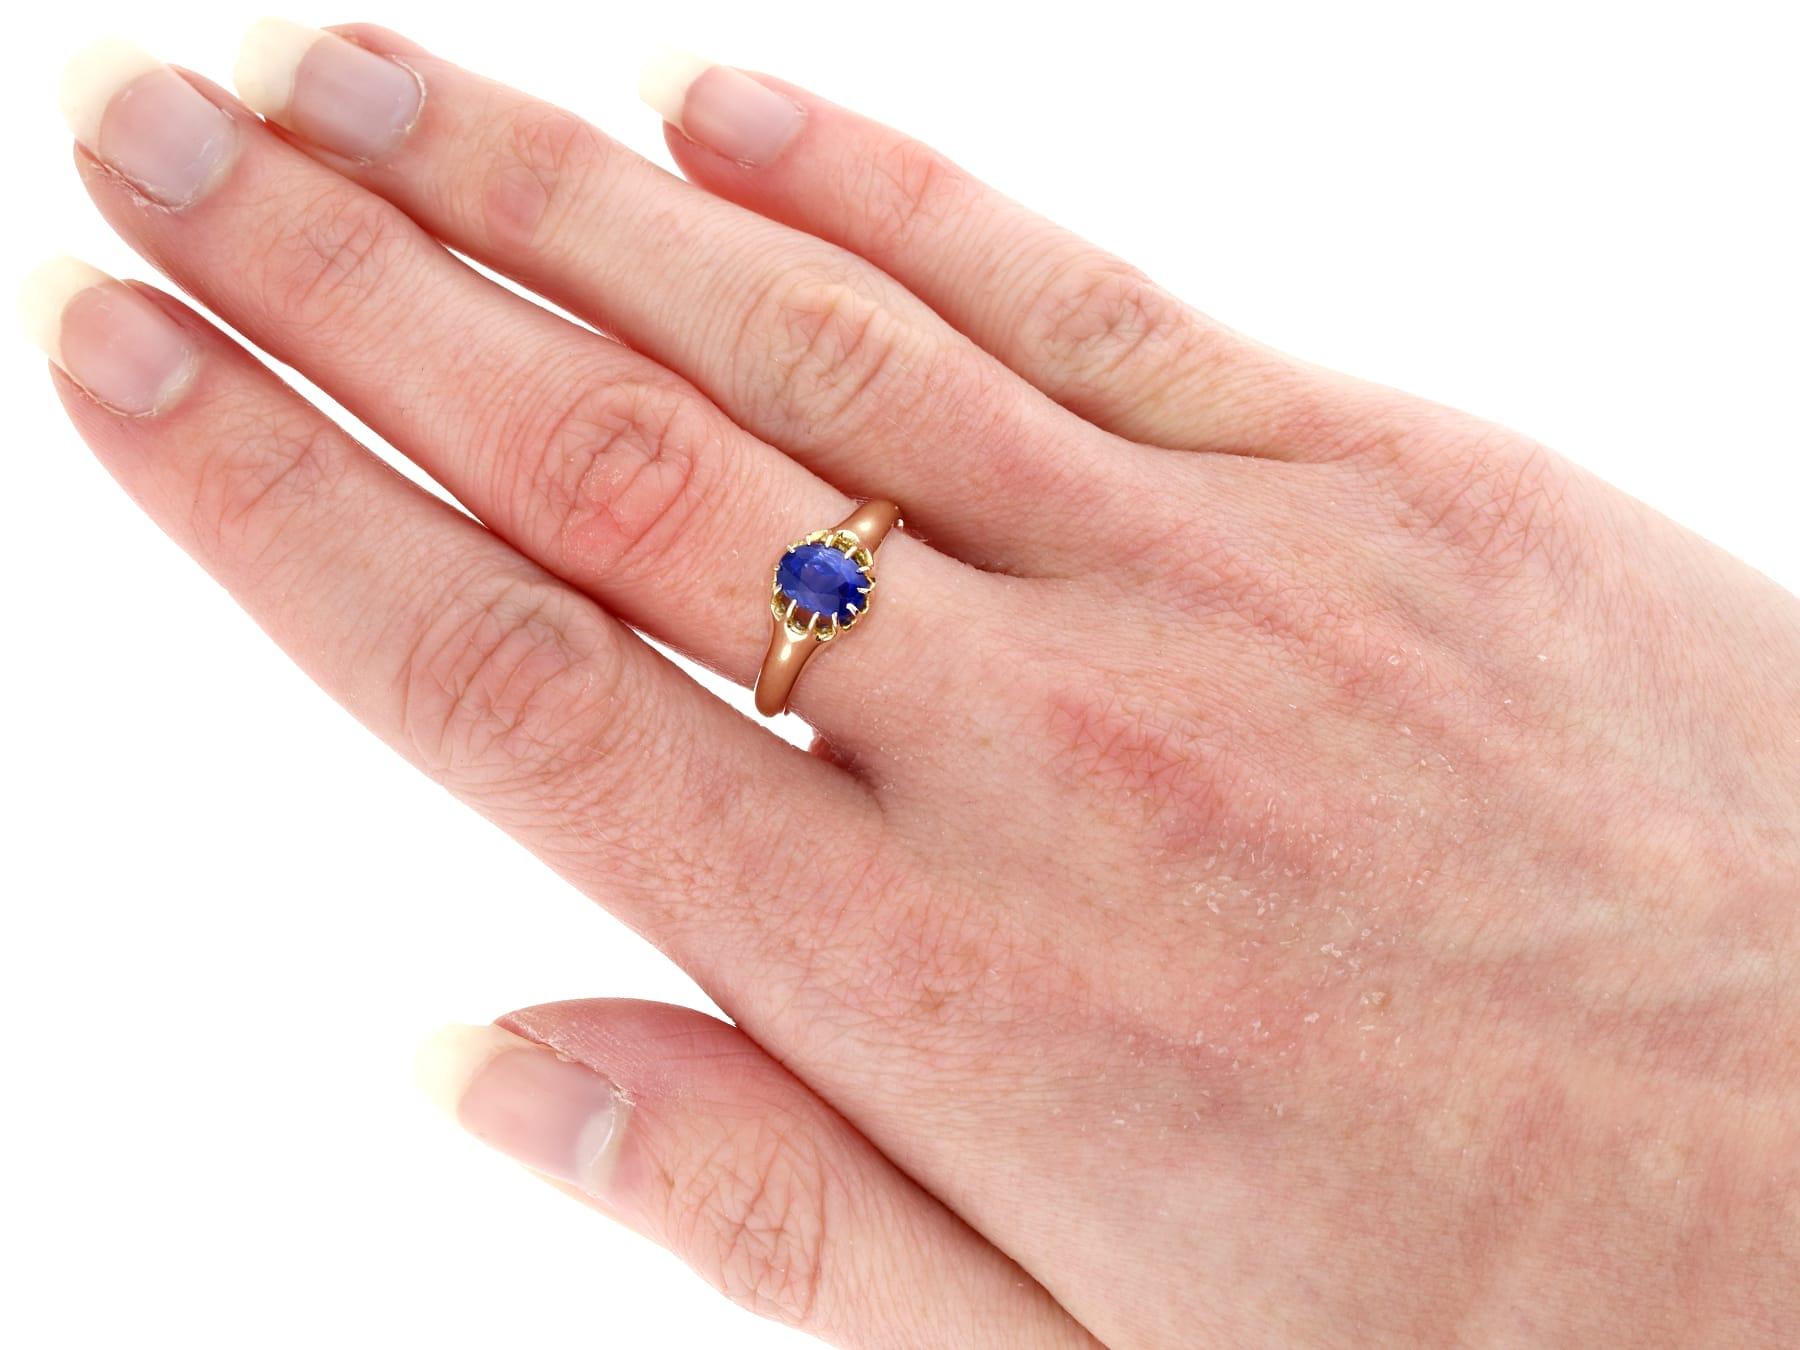 Antique 1.42 Carat Basaltic Sapphire and 14k Yellow Gold Ring, circa 1910 For Sale 2